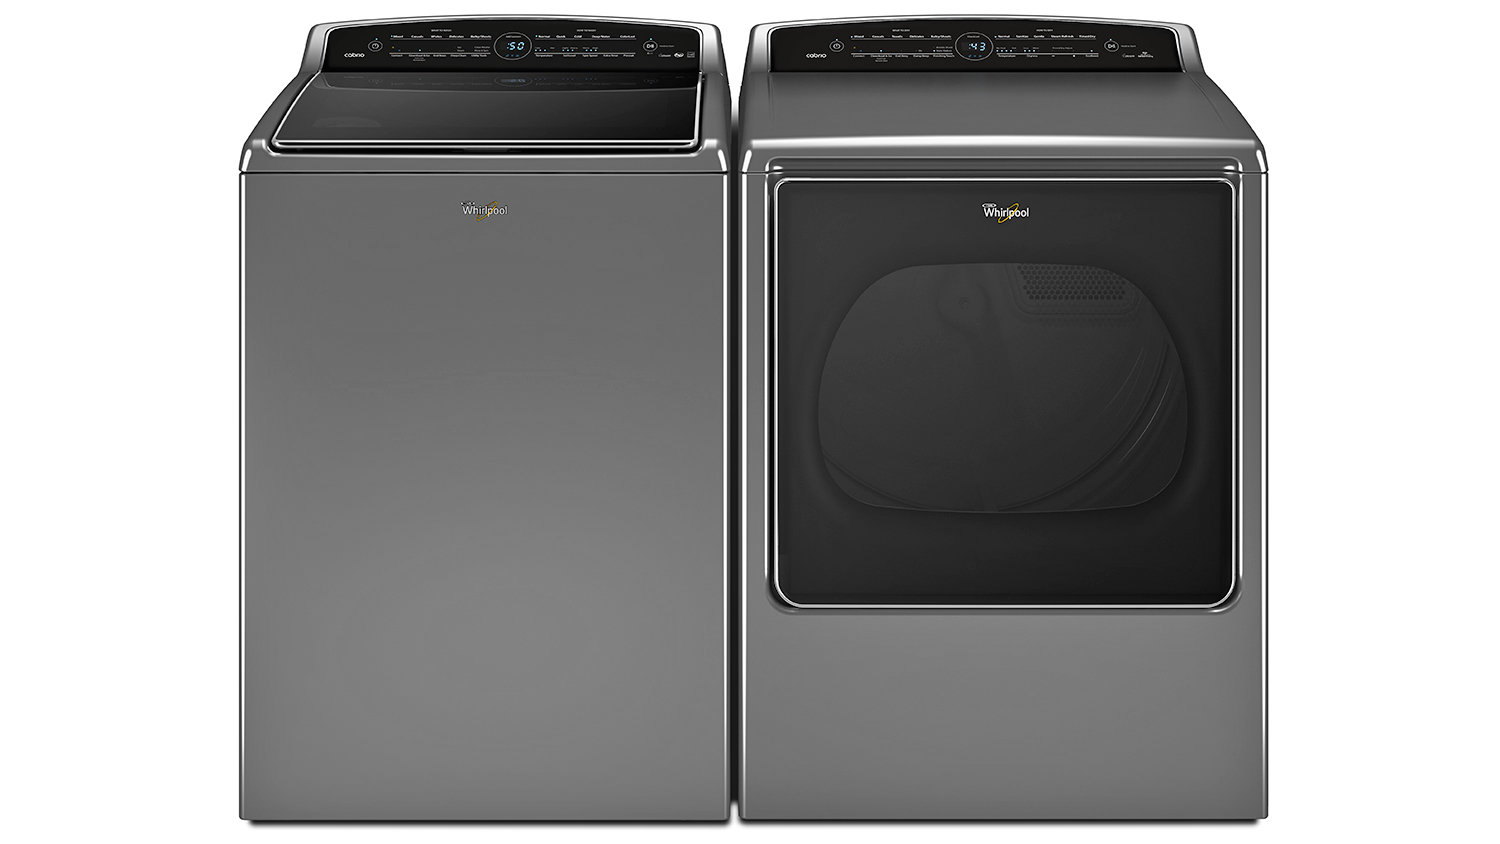 Whirlpool’s New Washer And Dryer Automatically Restocks Detergents Using Amazon Dash